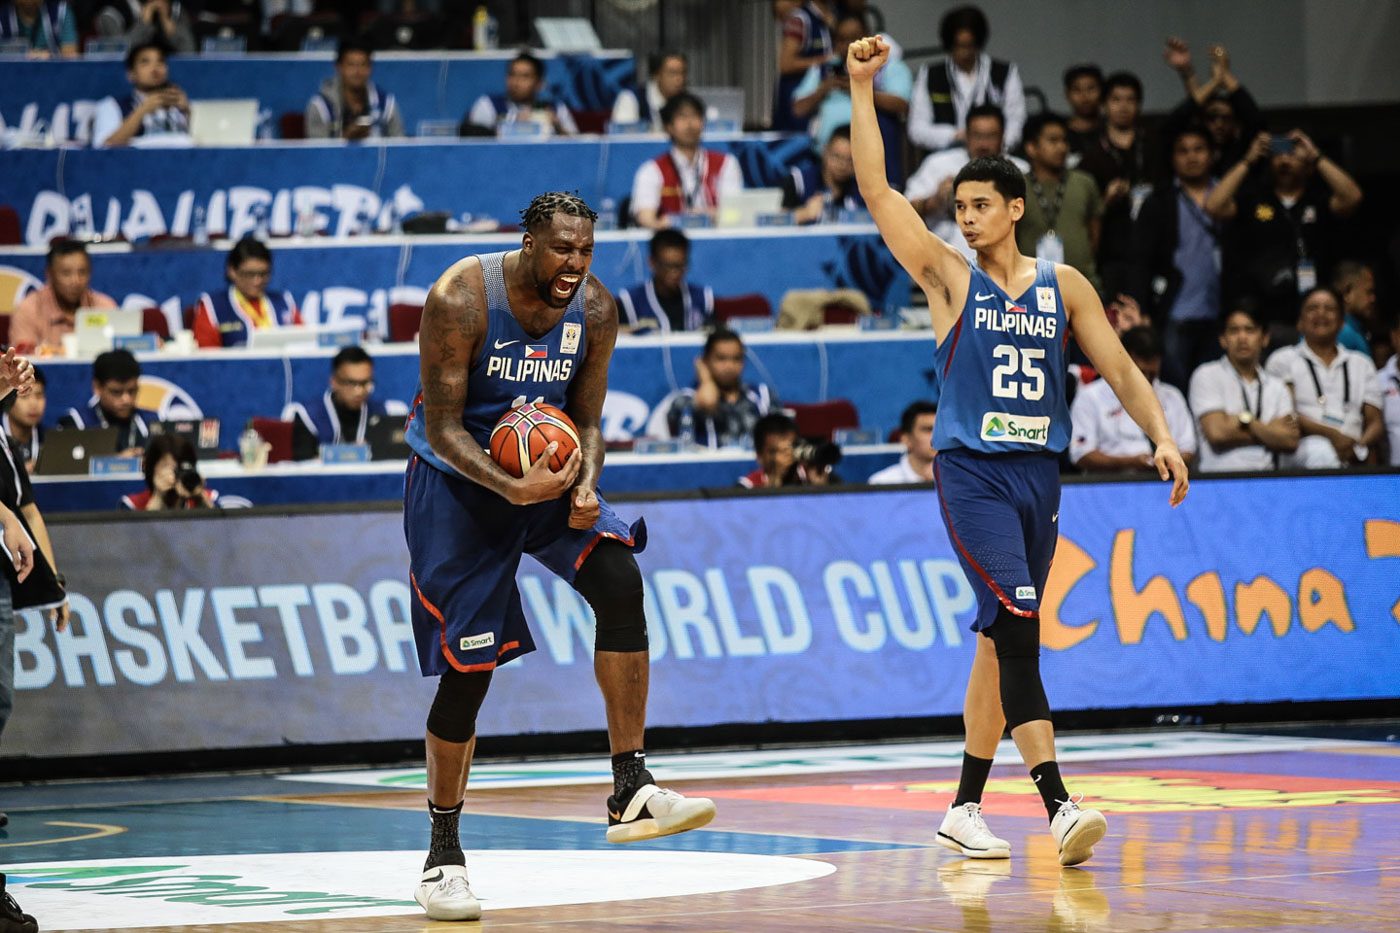 Bashers are ‘going to find something else,’ says Blatche